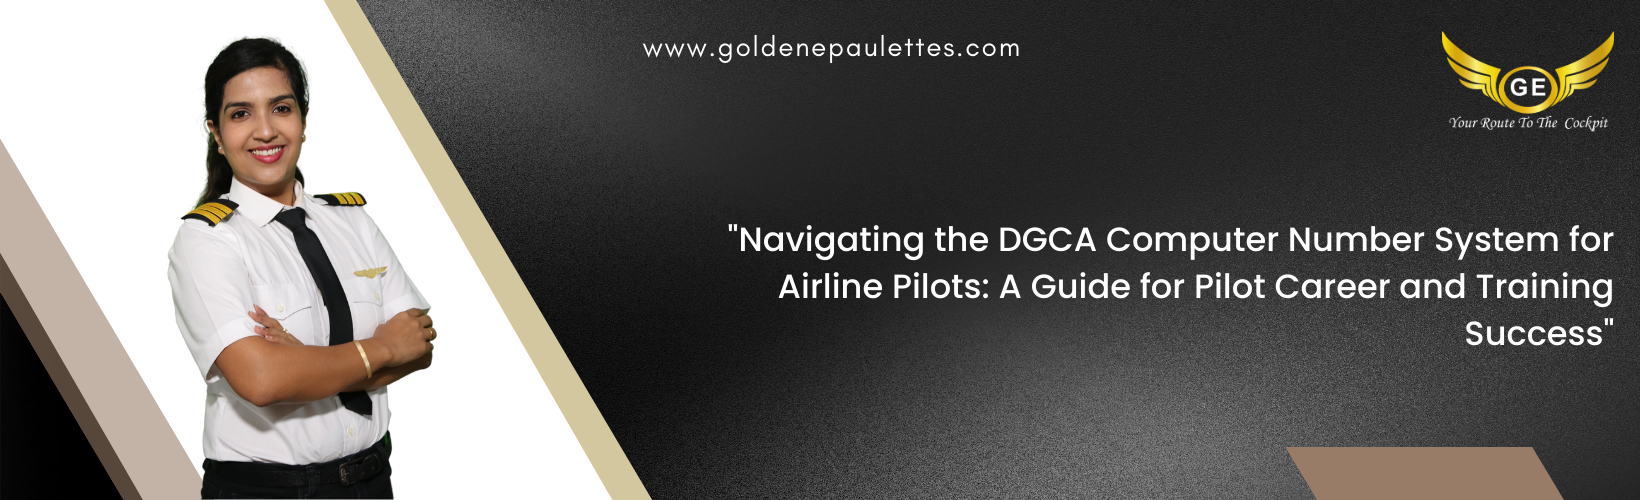 Navigating the DGCA Computer Number System for Airline Pilots